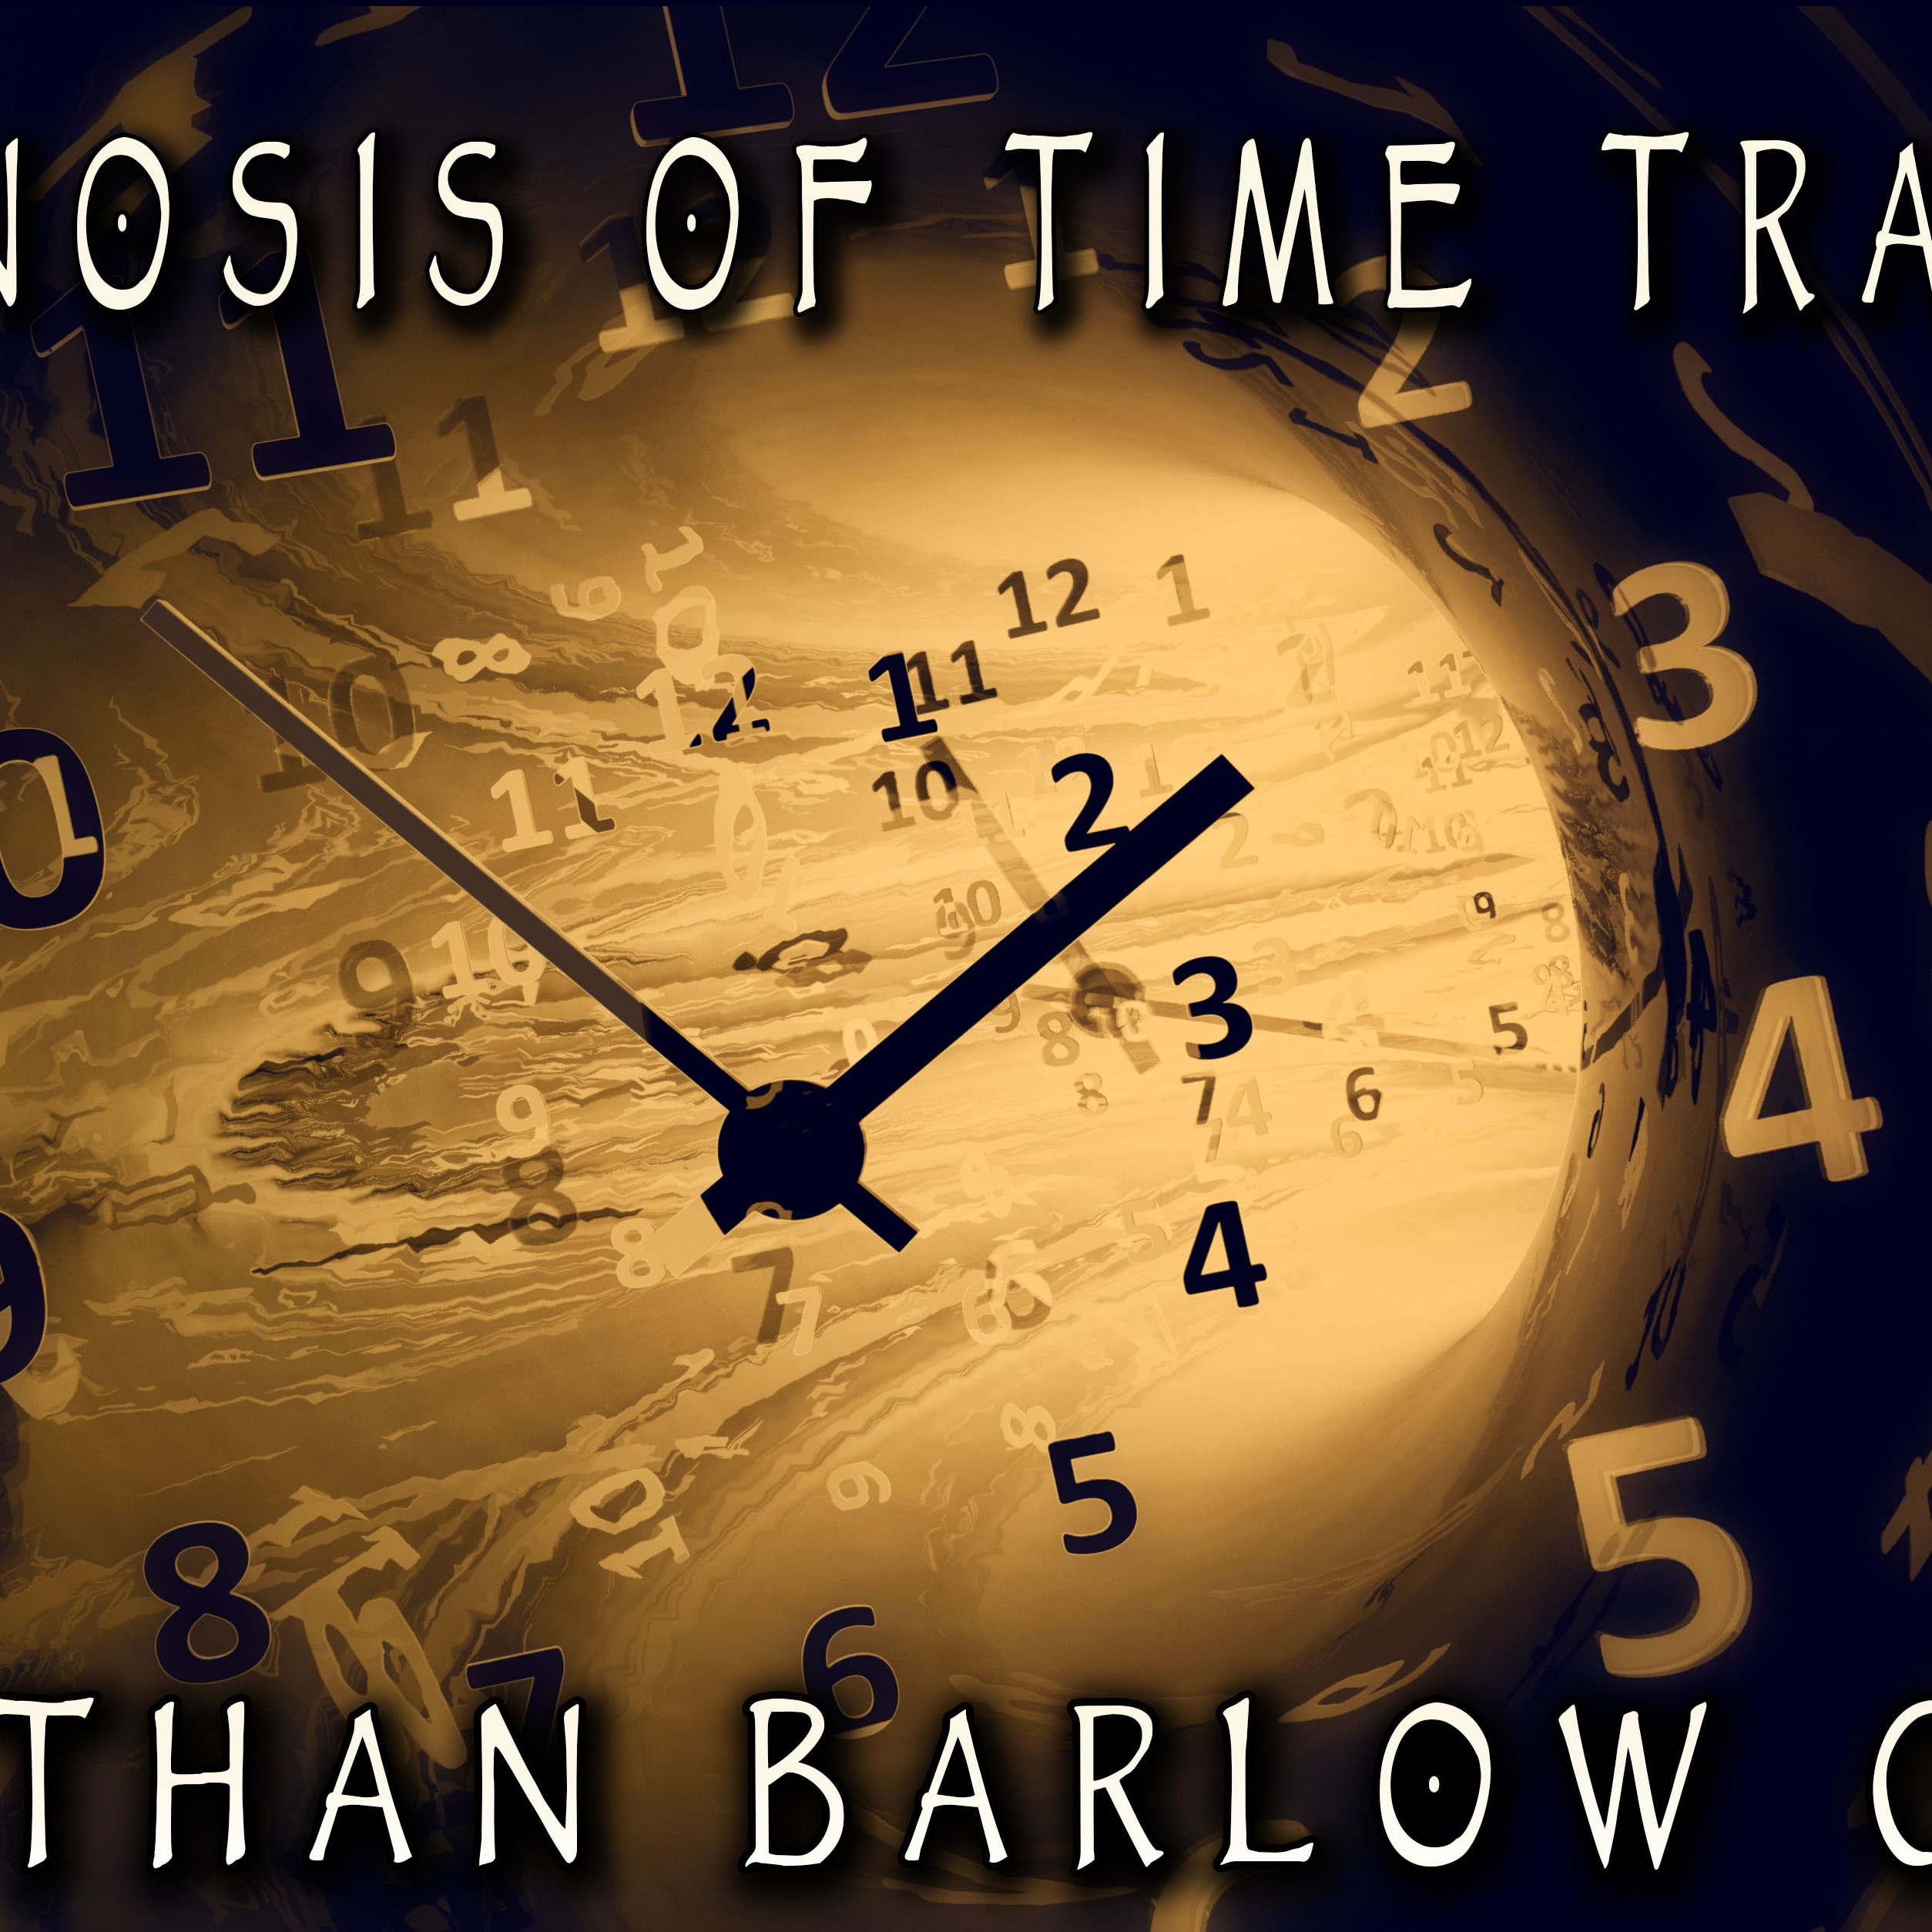 Rev. Jonathan Barlow Gee on The Gnosis of Time Travel